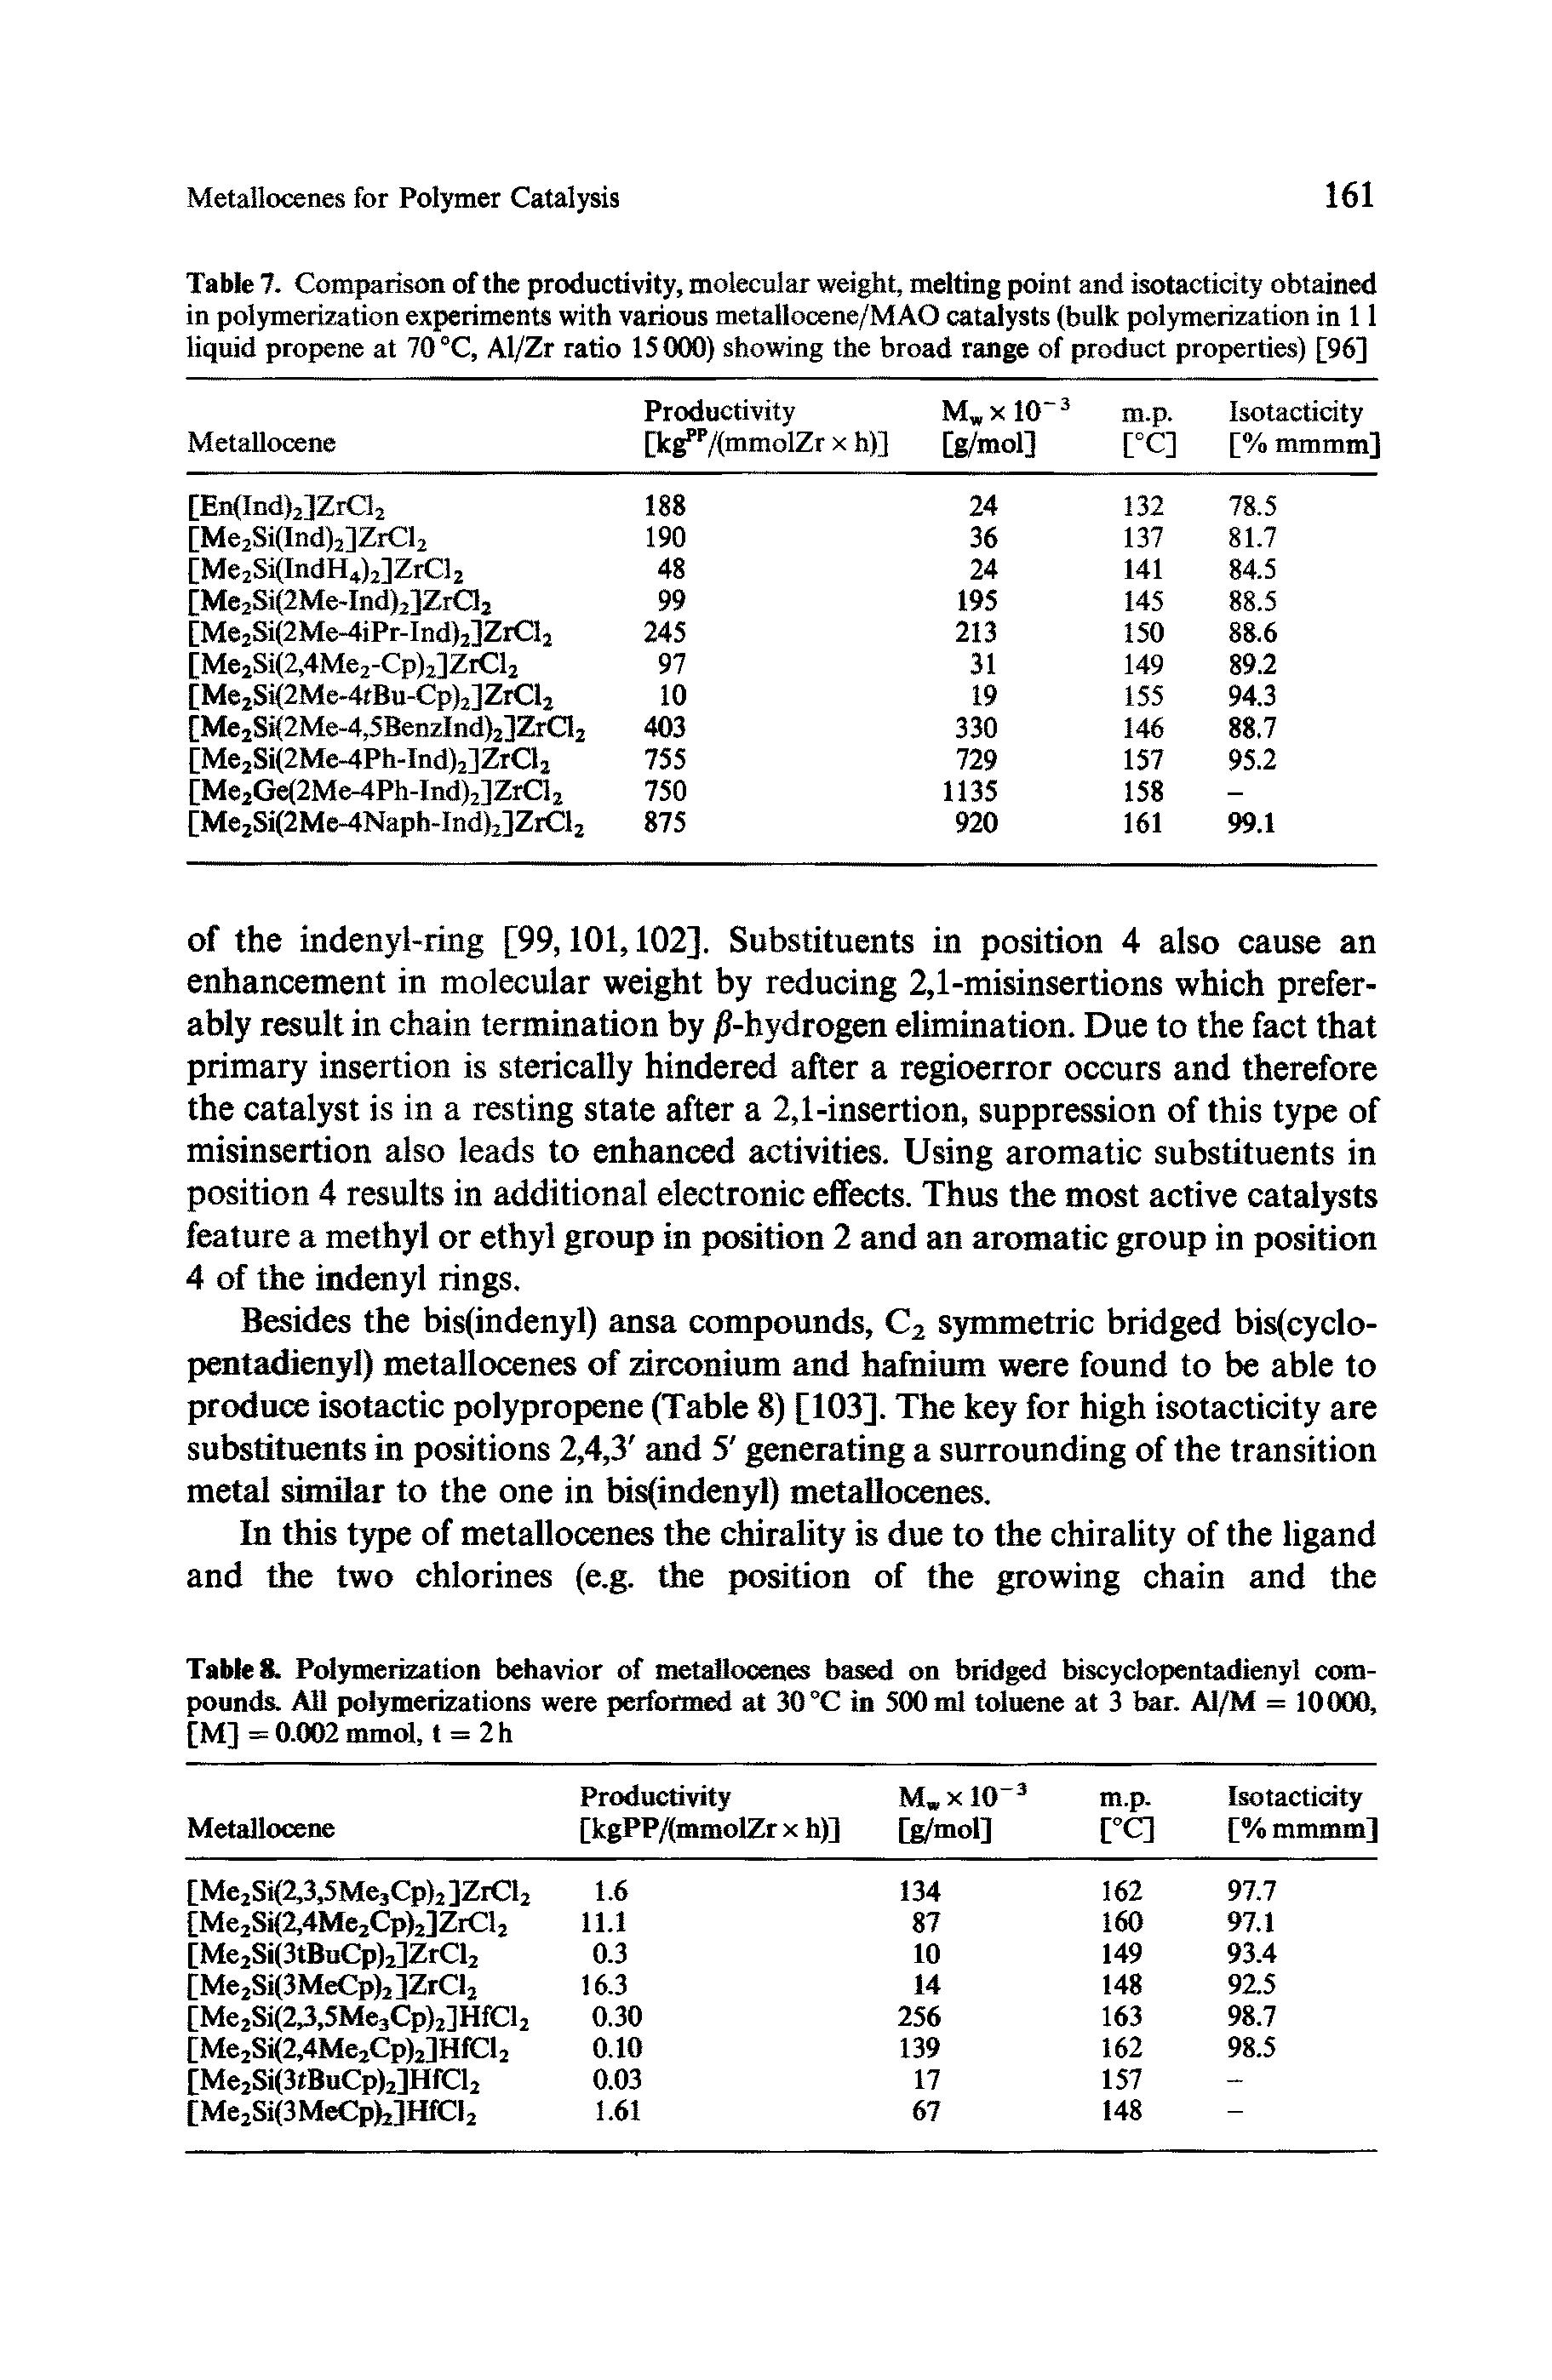 Table 7. Comparison of the productivity, molecular weight, melting point and isotaeticity obtained in polymerization experiments with various metallocene/MAO catalysts (bulk polymerization in 11 liquid propene at 70 °C, Al/Zr ratio 15000) showing the broad range of product properties) [96]...